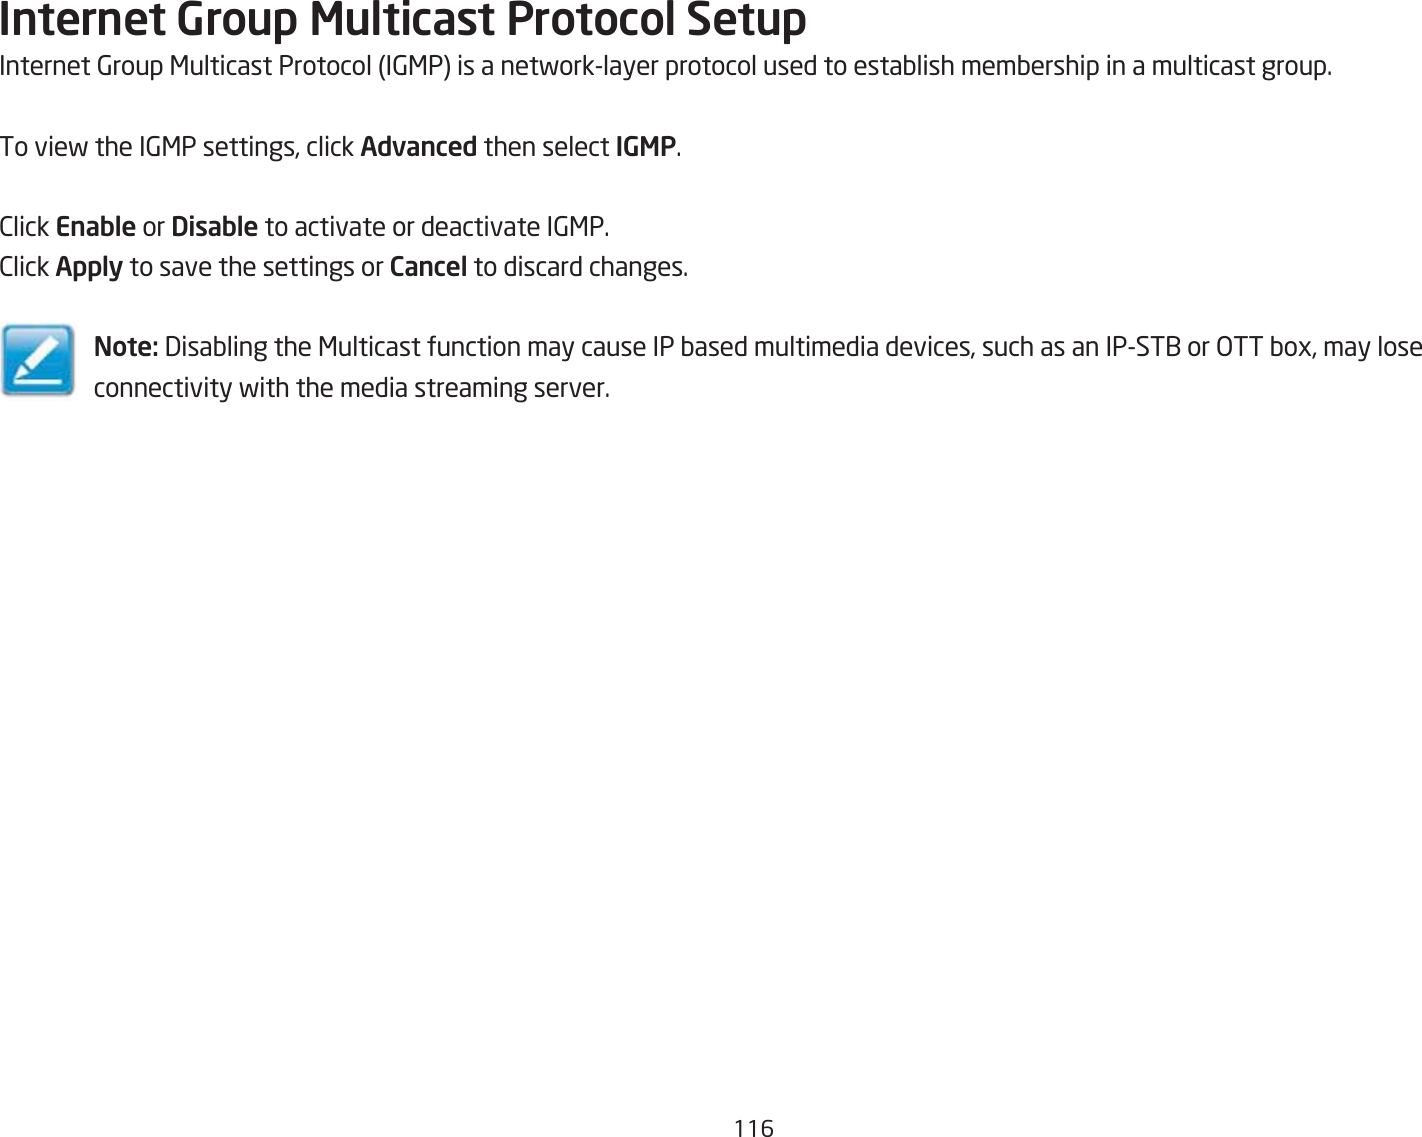 116Internet Group Multicast Protocol SetupInternet 6roup &lt;ulticast Protocol I6&lt;P is a netforklayer protocol used to estaQlish memQership in a multicast group.To vief the I6&lt;P settings, click Advanced then select IGMP.2lick Enable or Disable to activate or deactivate I6&lt;P.2lick Apply to save the settings or Cancel to discard changes.Note: 3isaQling the &lt;ulticast function may cause IP Qased multimedia devices, such as an IPST1 or &gt;TT Qog, may lose connectivity fith the media streaming server.